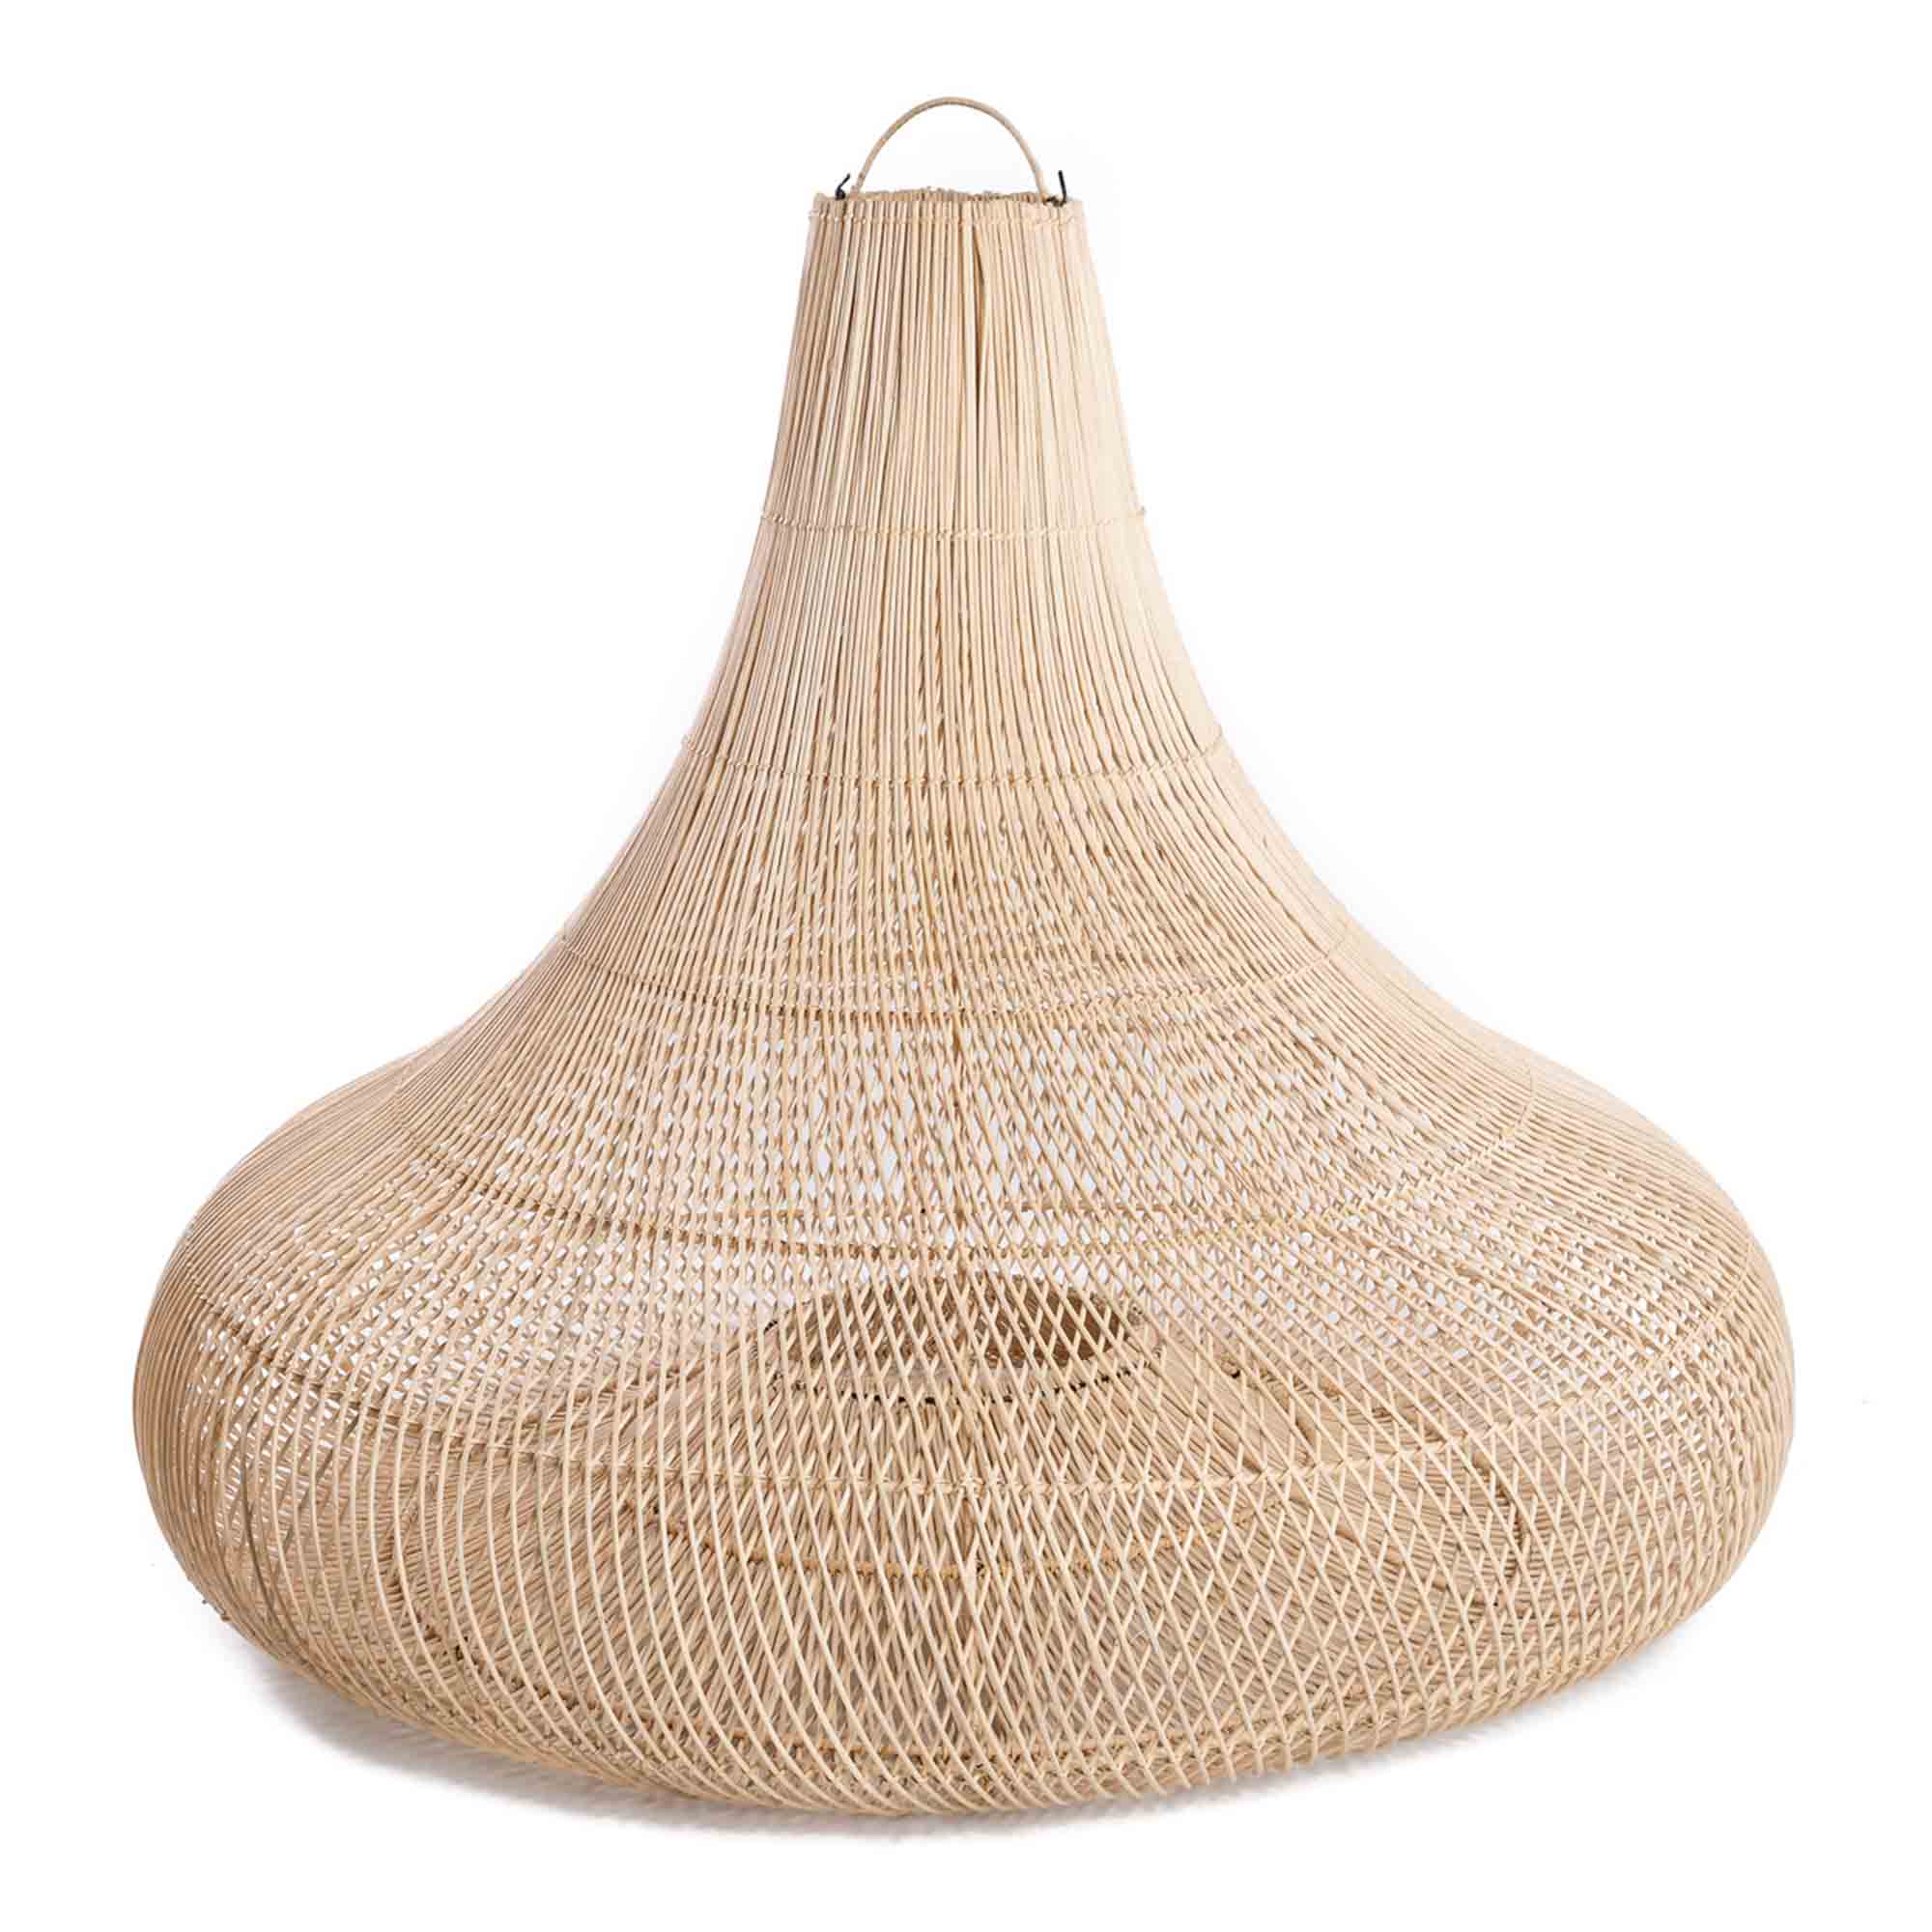 THE SHALA Pendant Lamp Natural large size, front view, rattan material